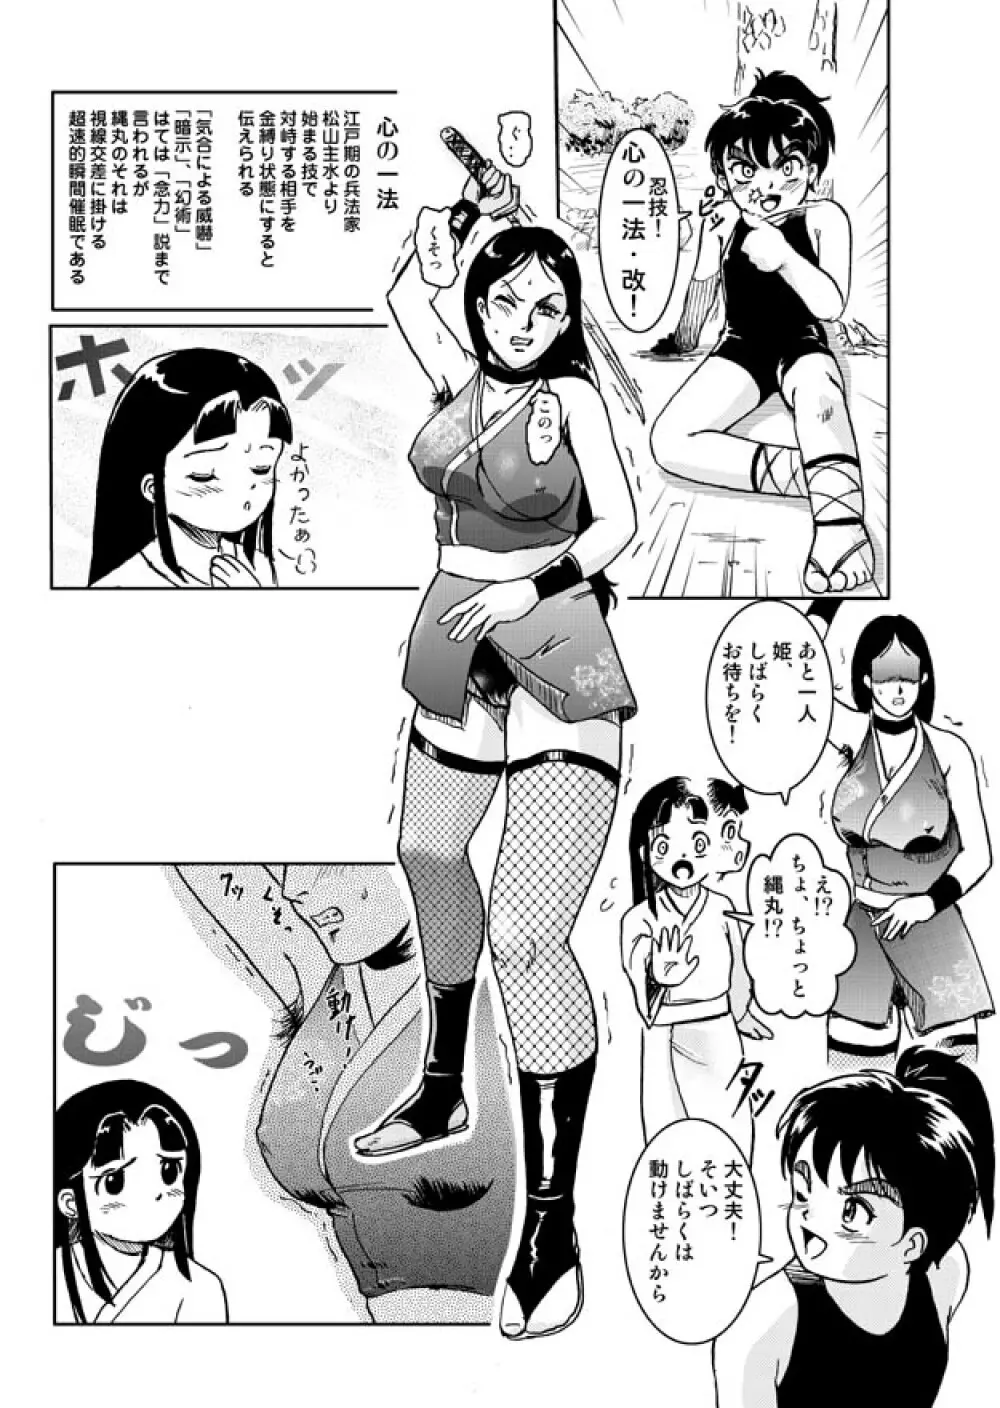 Same-themed manga about kid fighting female ninjas from japanese imageboard. Page.10